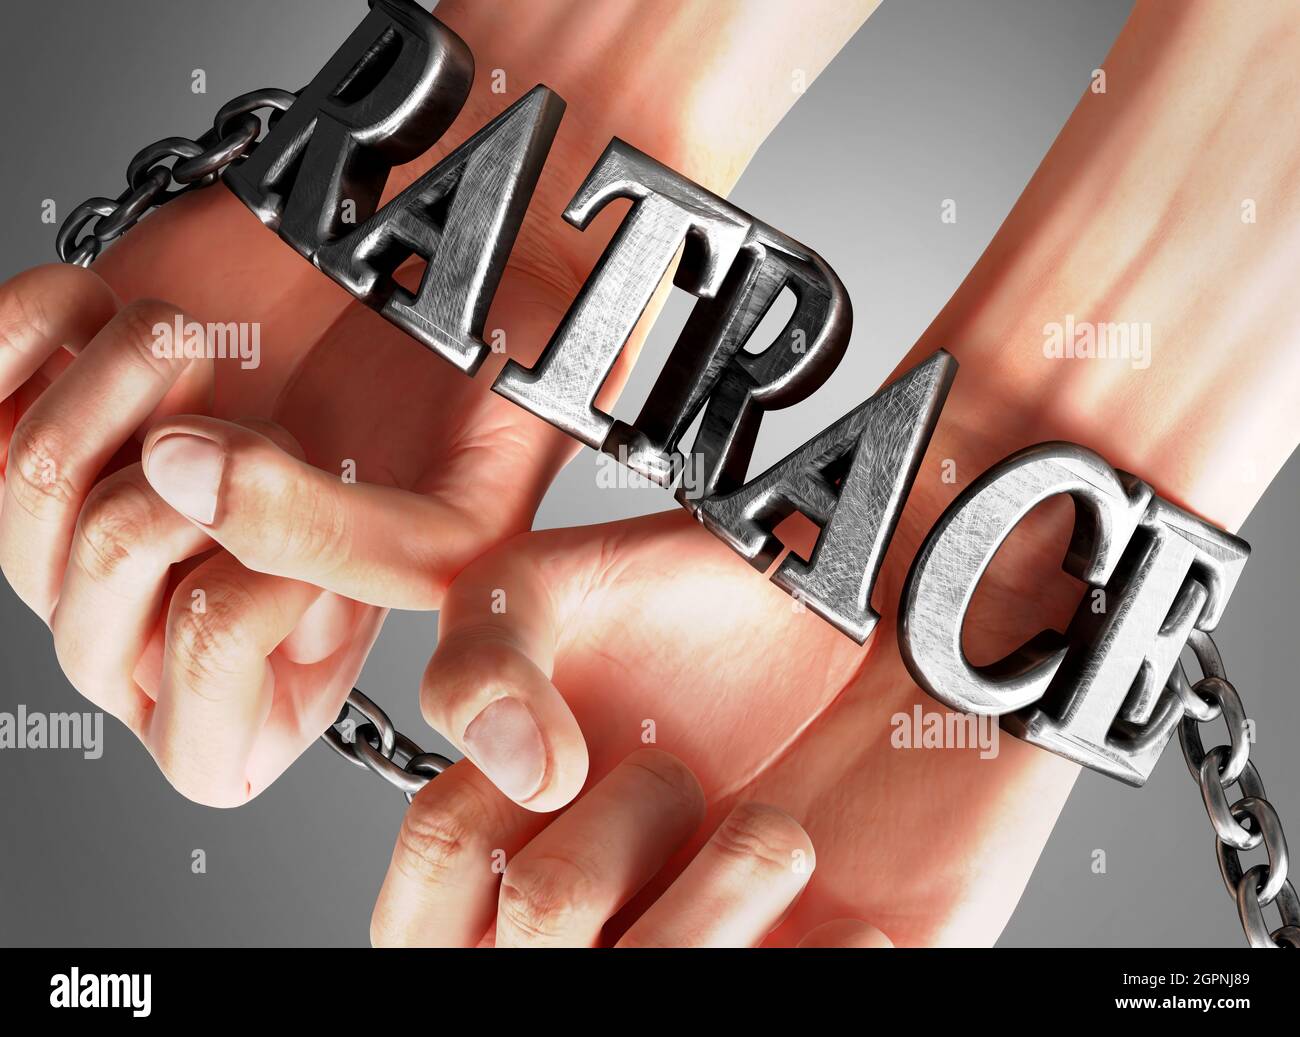 Ratrace, social impact and its influence - a concept showing a person's hands in chains with a word Ratrace as a symbol of its burden and misery it br Stock Photo